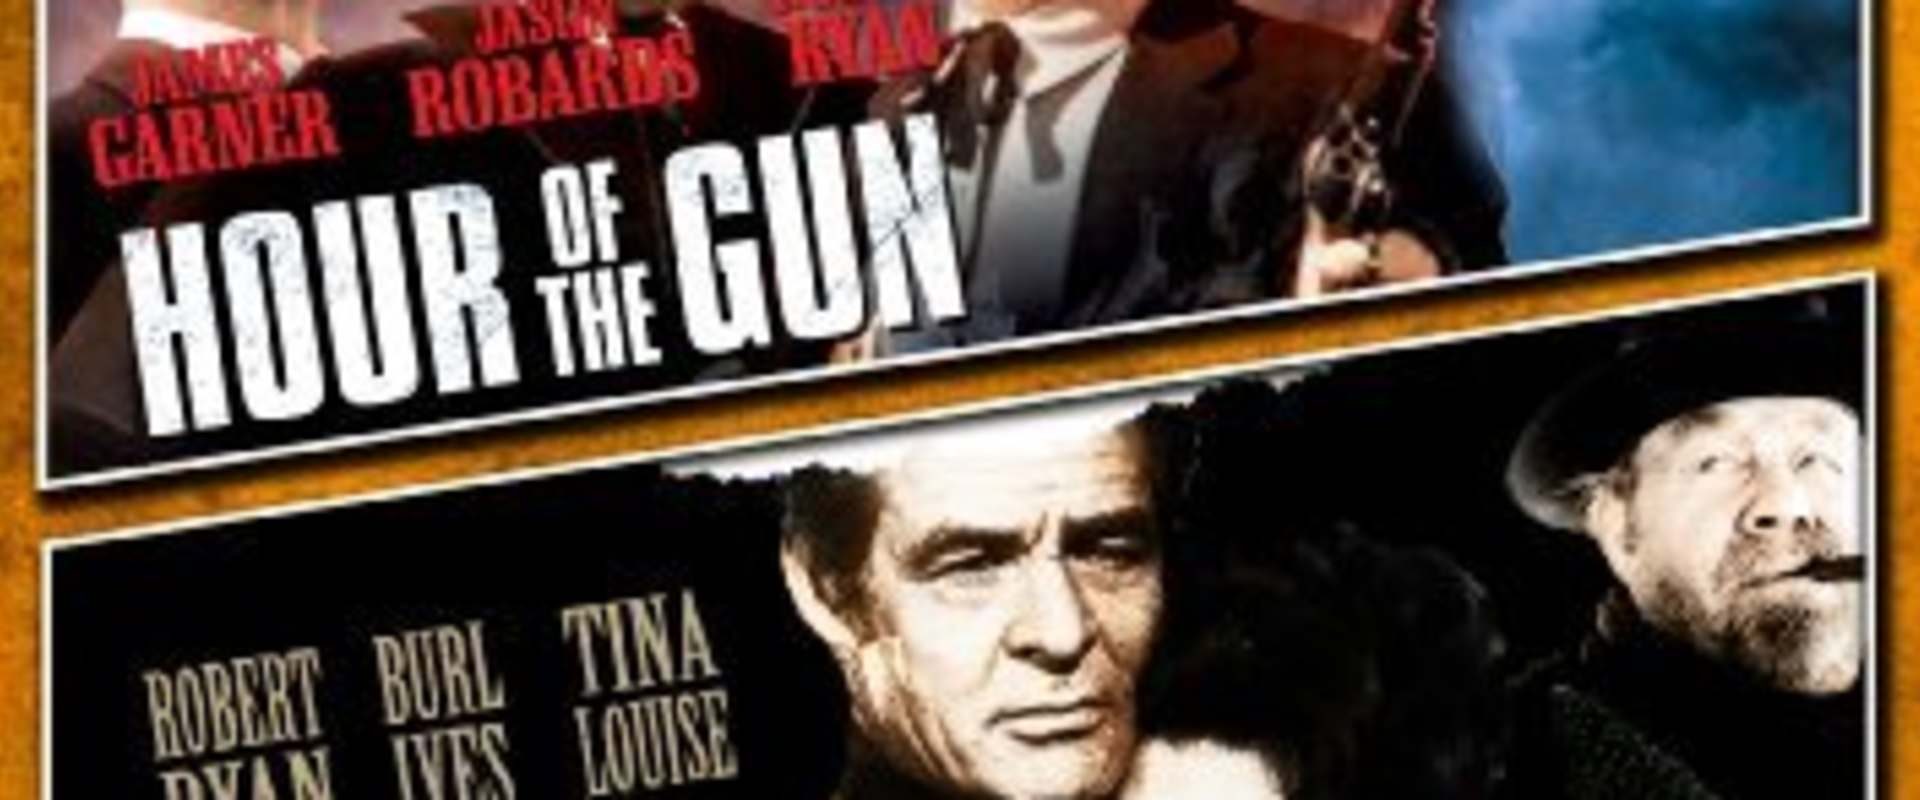 Hour of the Gun background 2